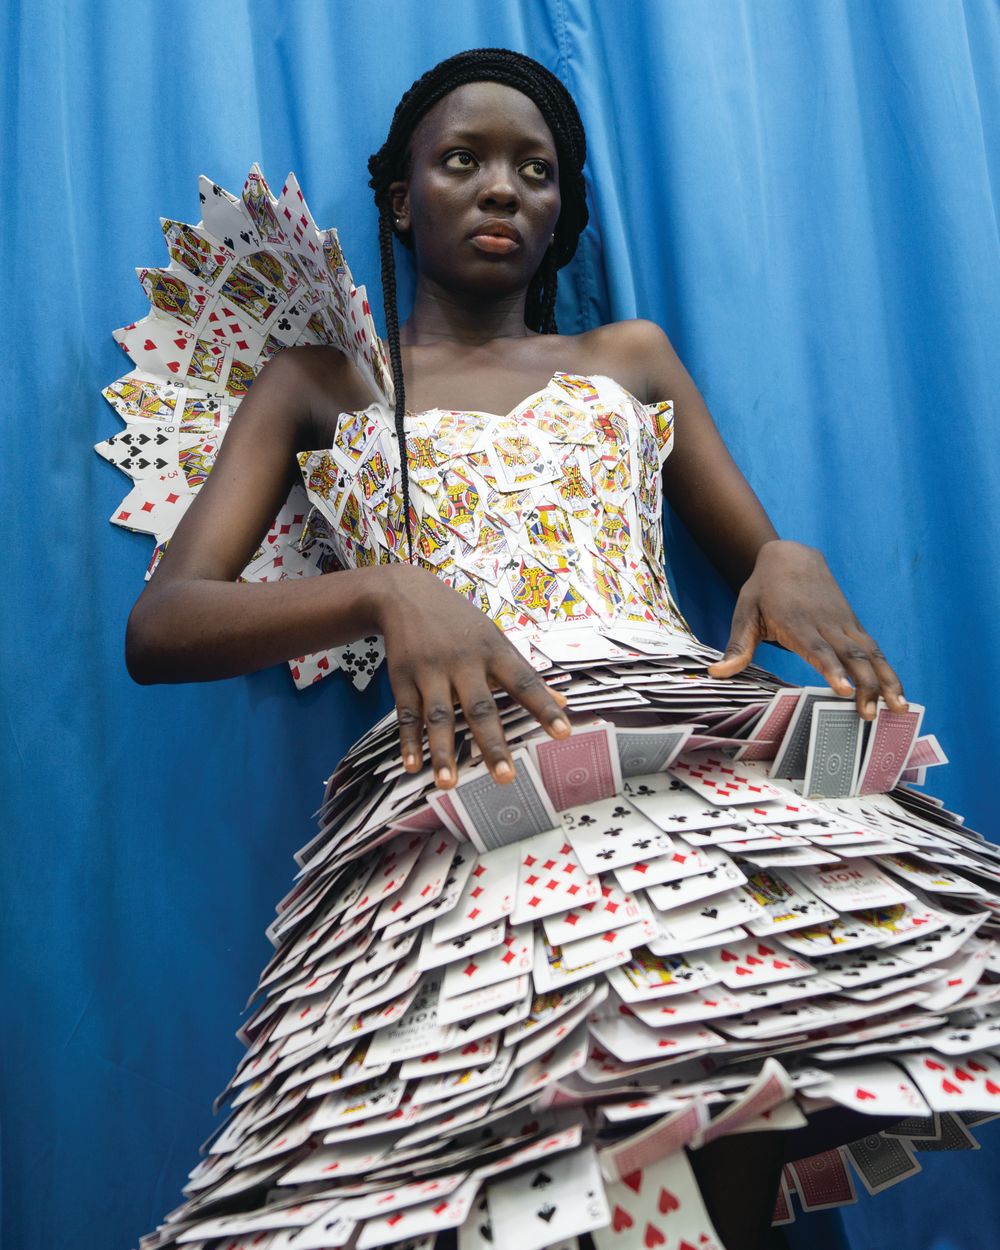 Outfit designed by BA (Hons) Creative Direction for Fashion student, Delali Ayivi made from playing cards.